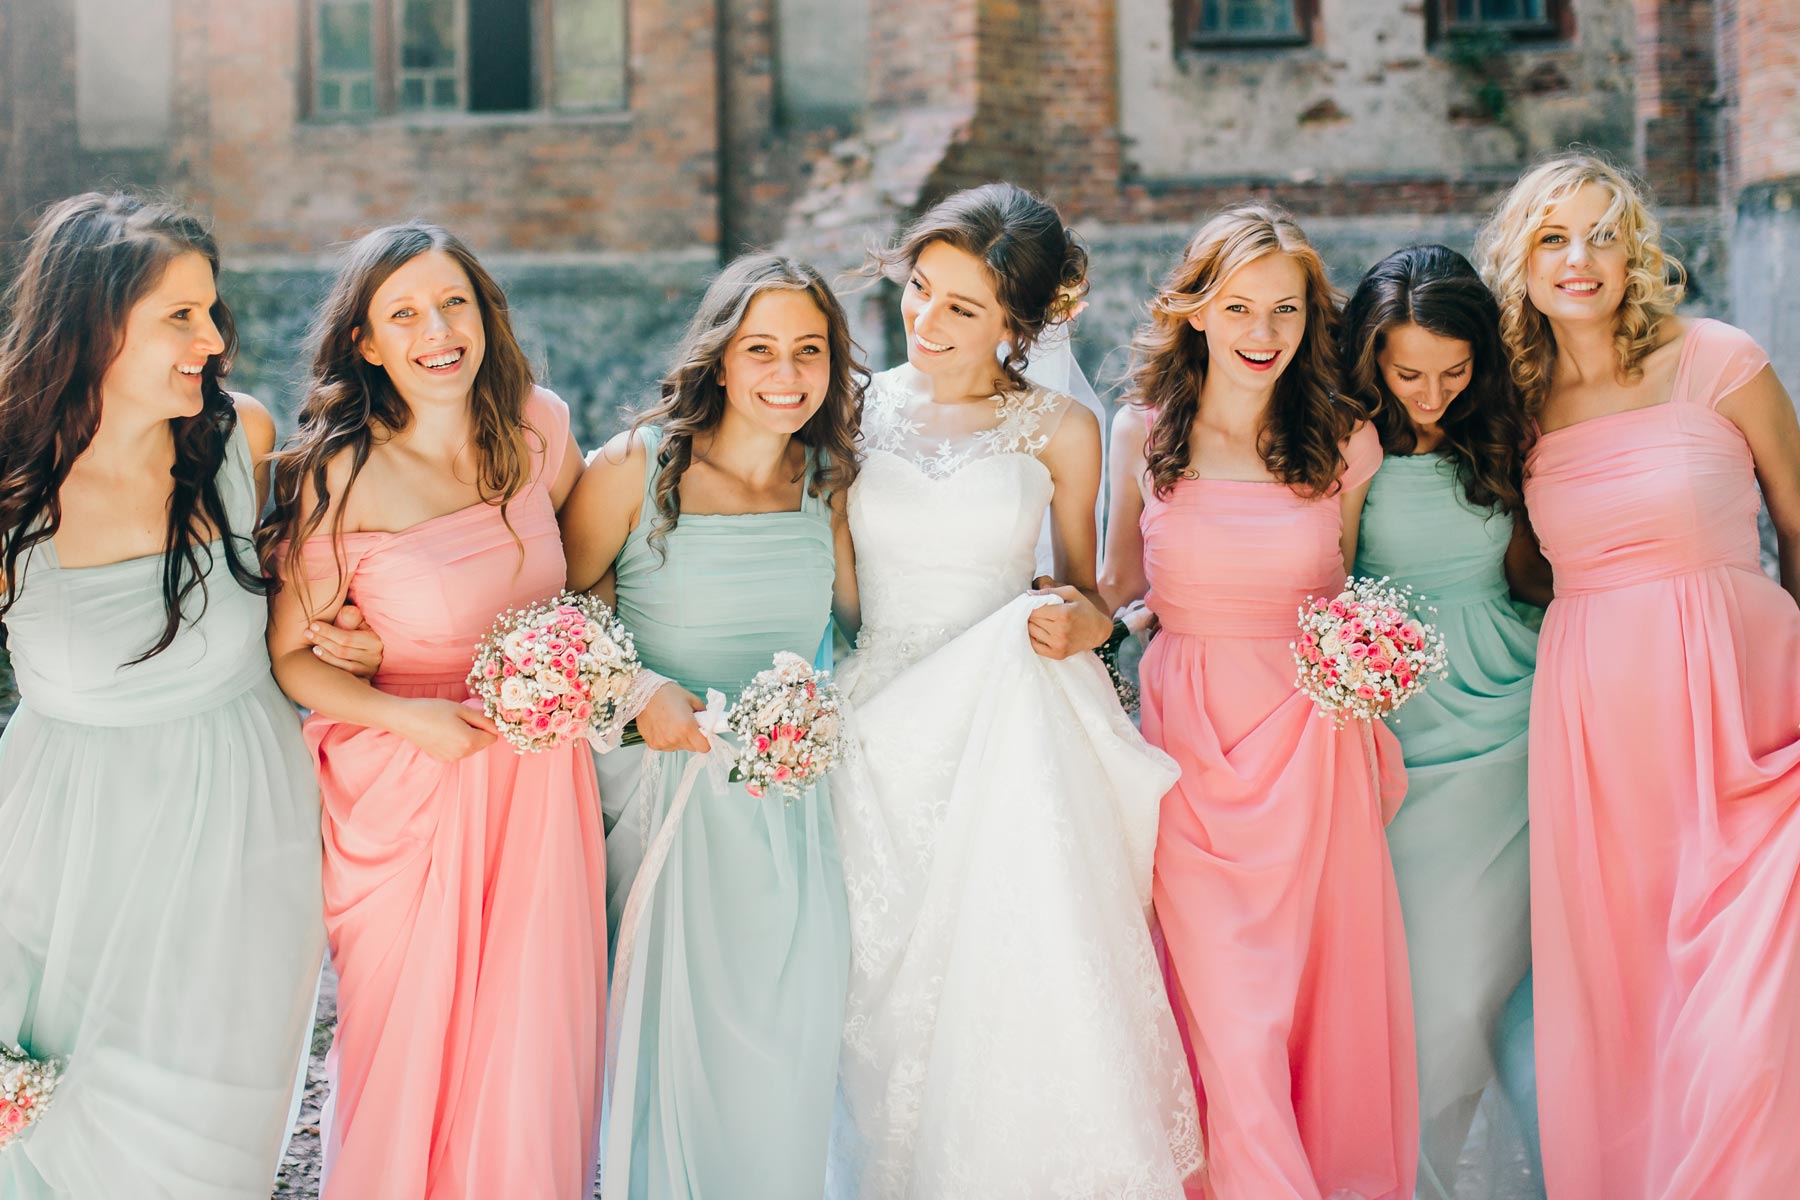 how much does bridesmaid dress alterations cost